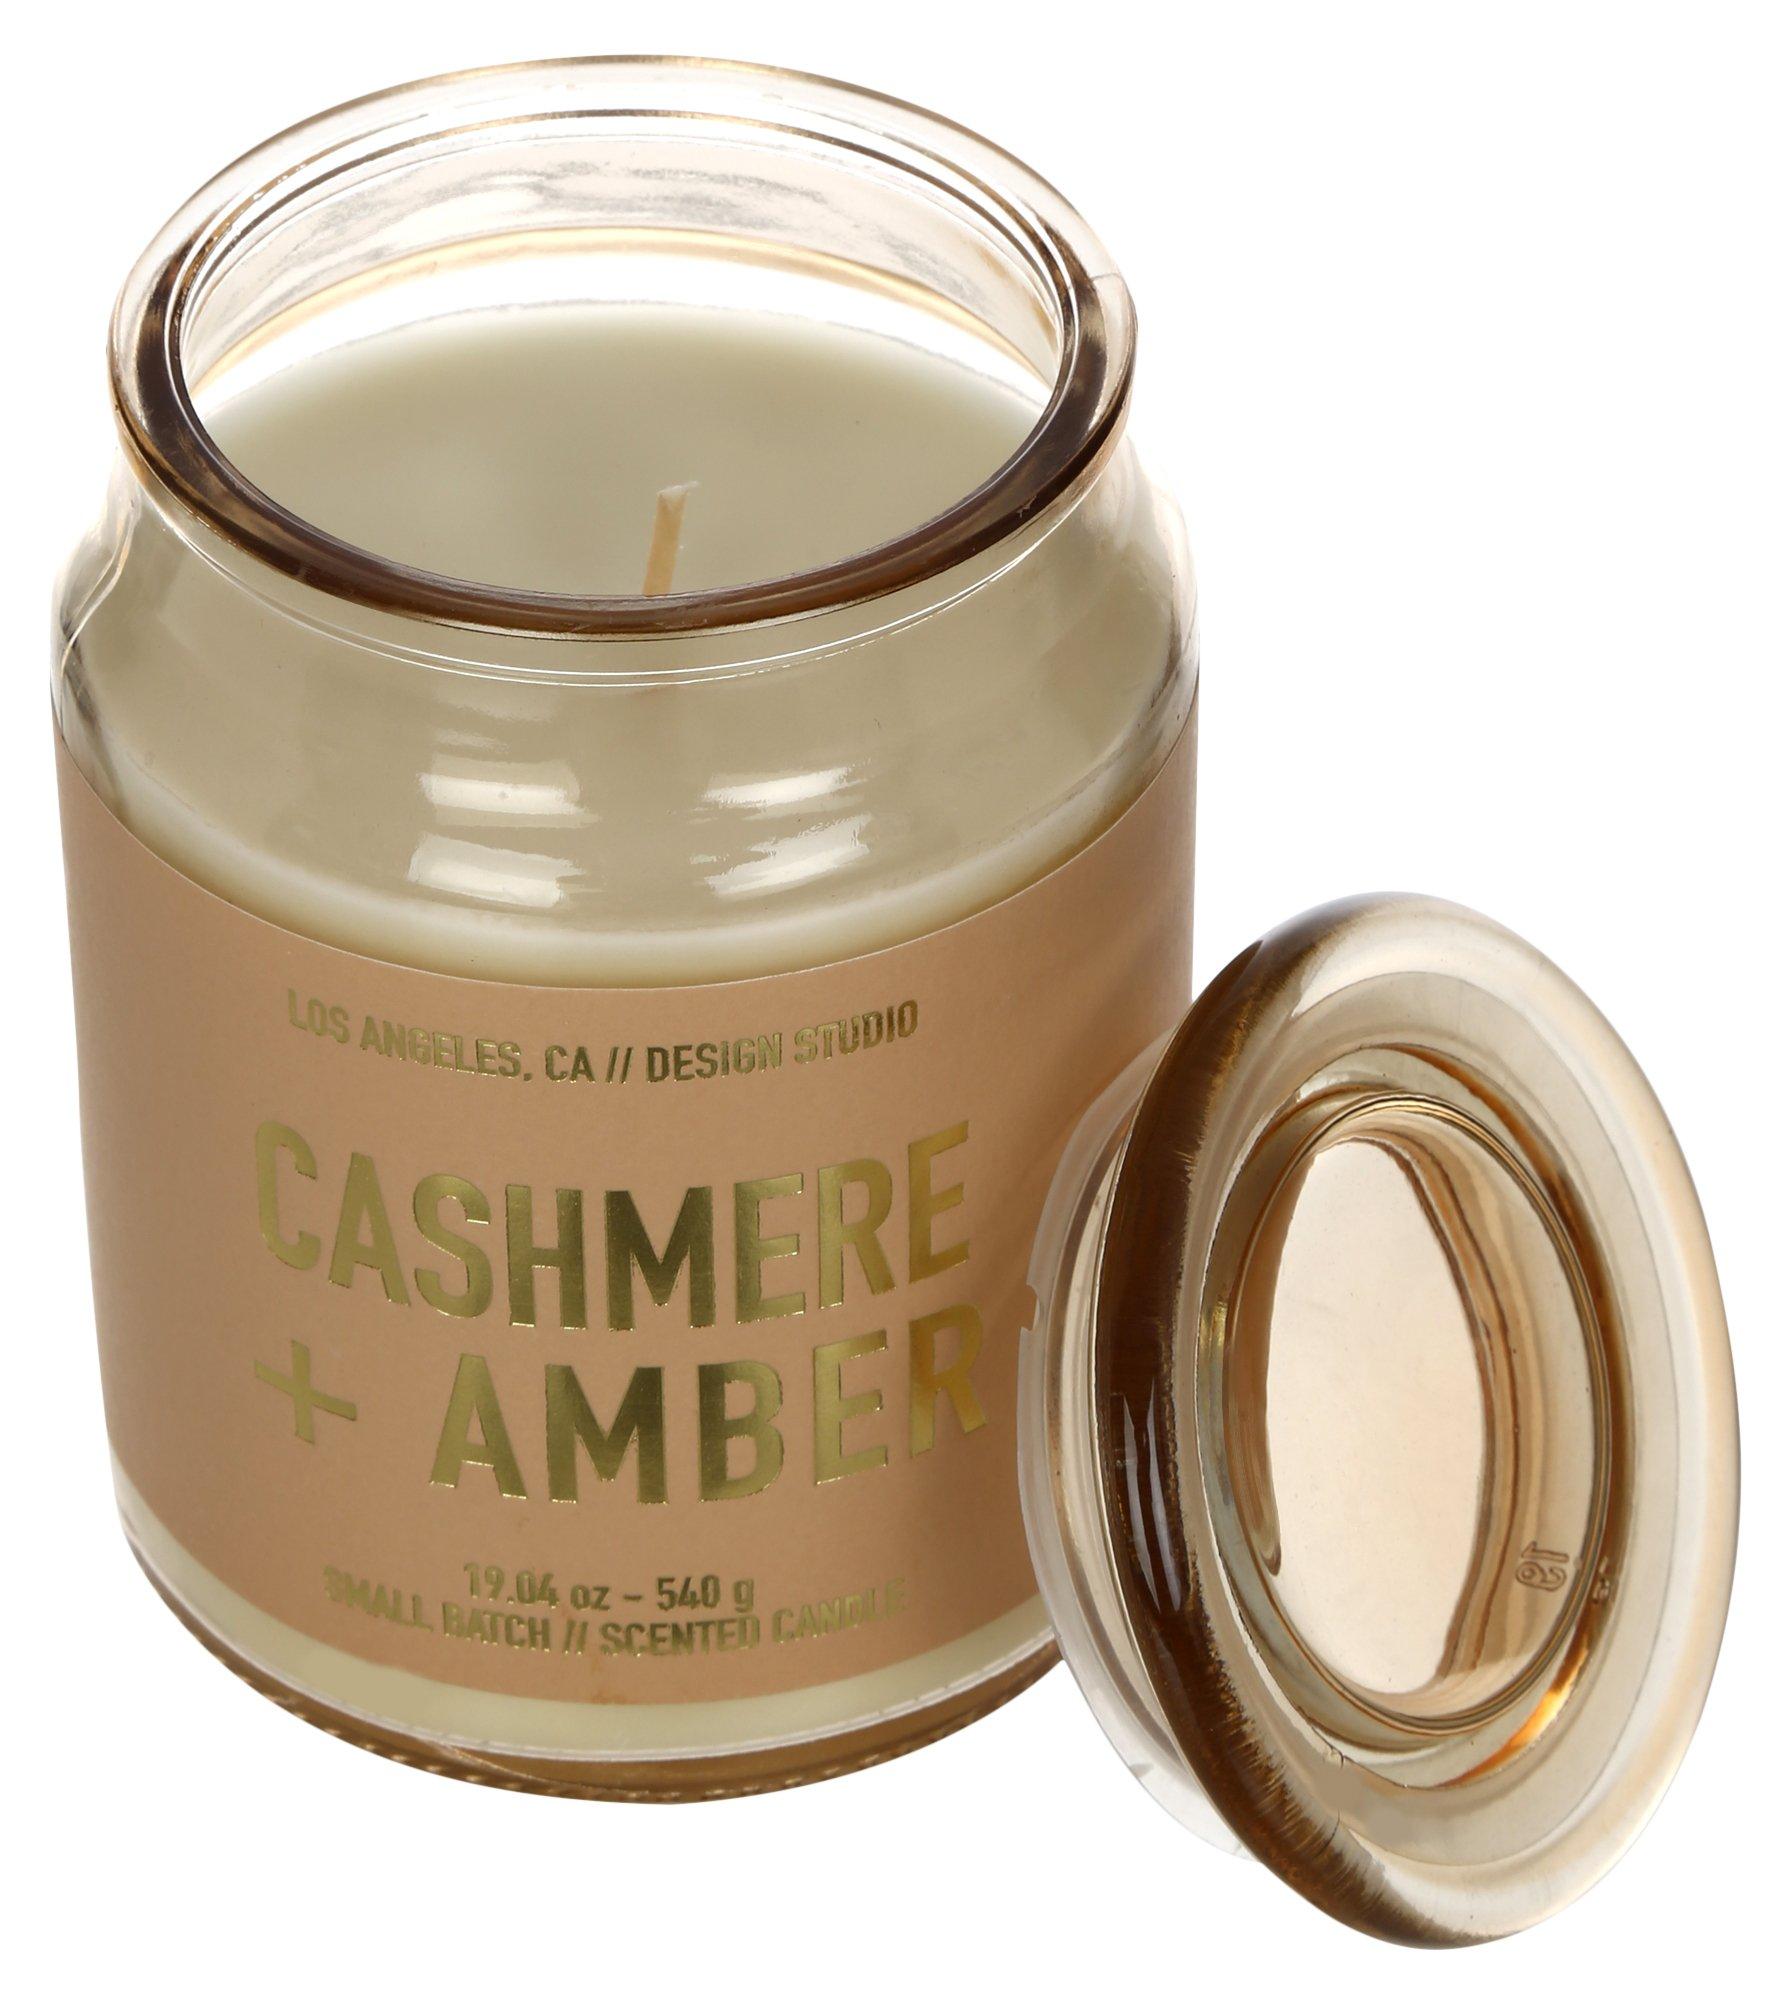 19 oz Cashmere & Amber Candle